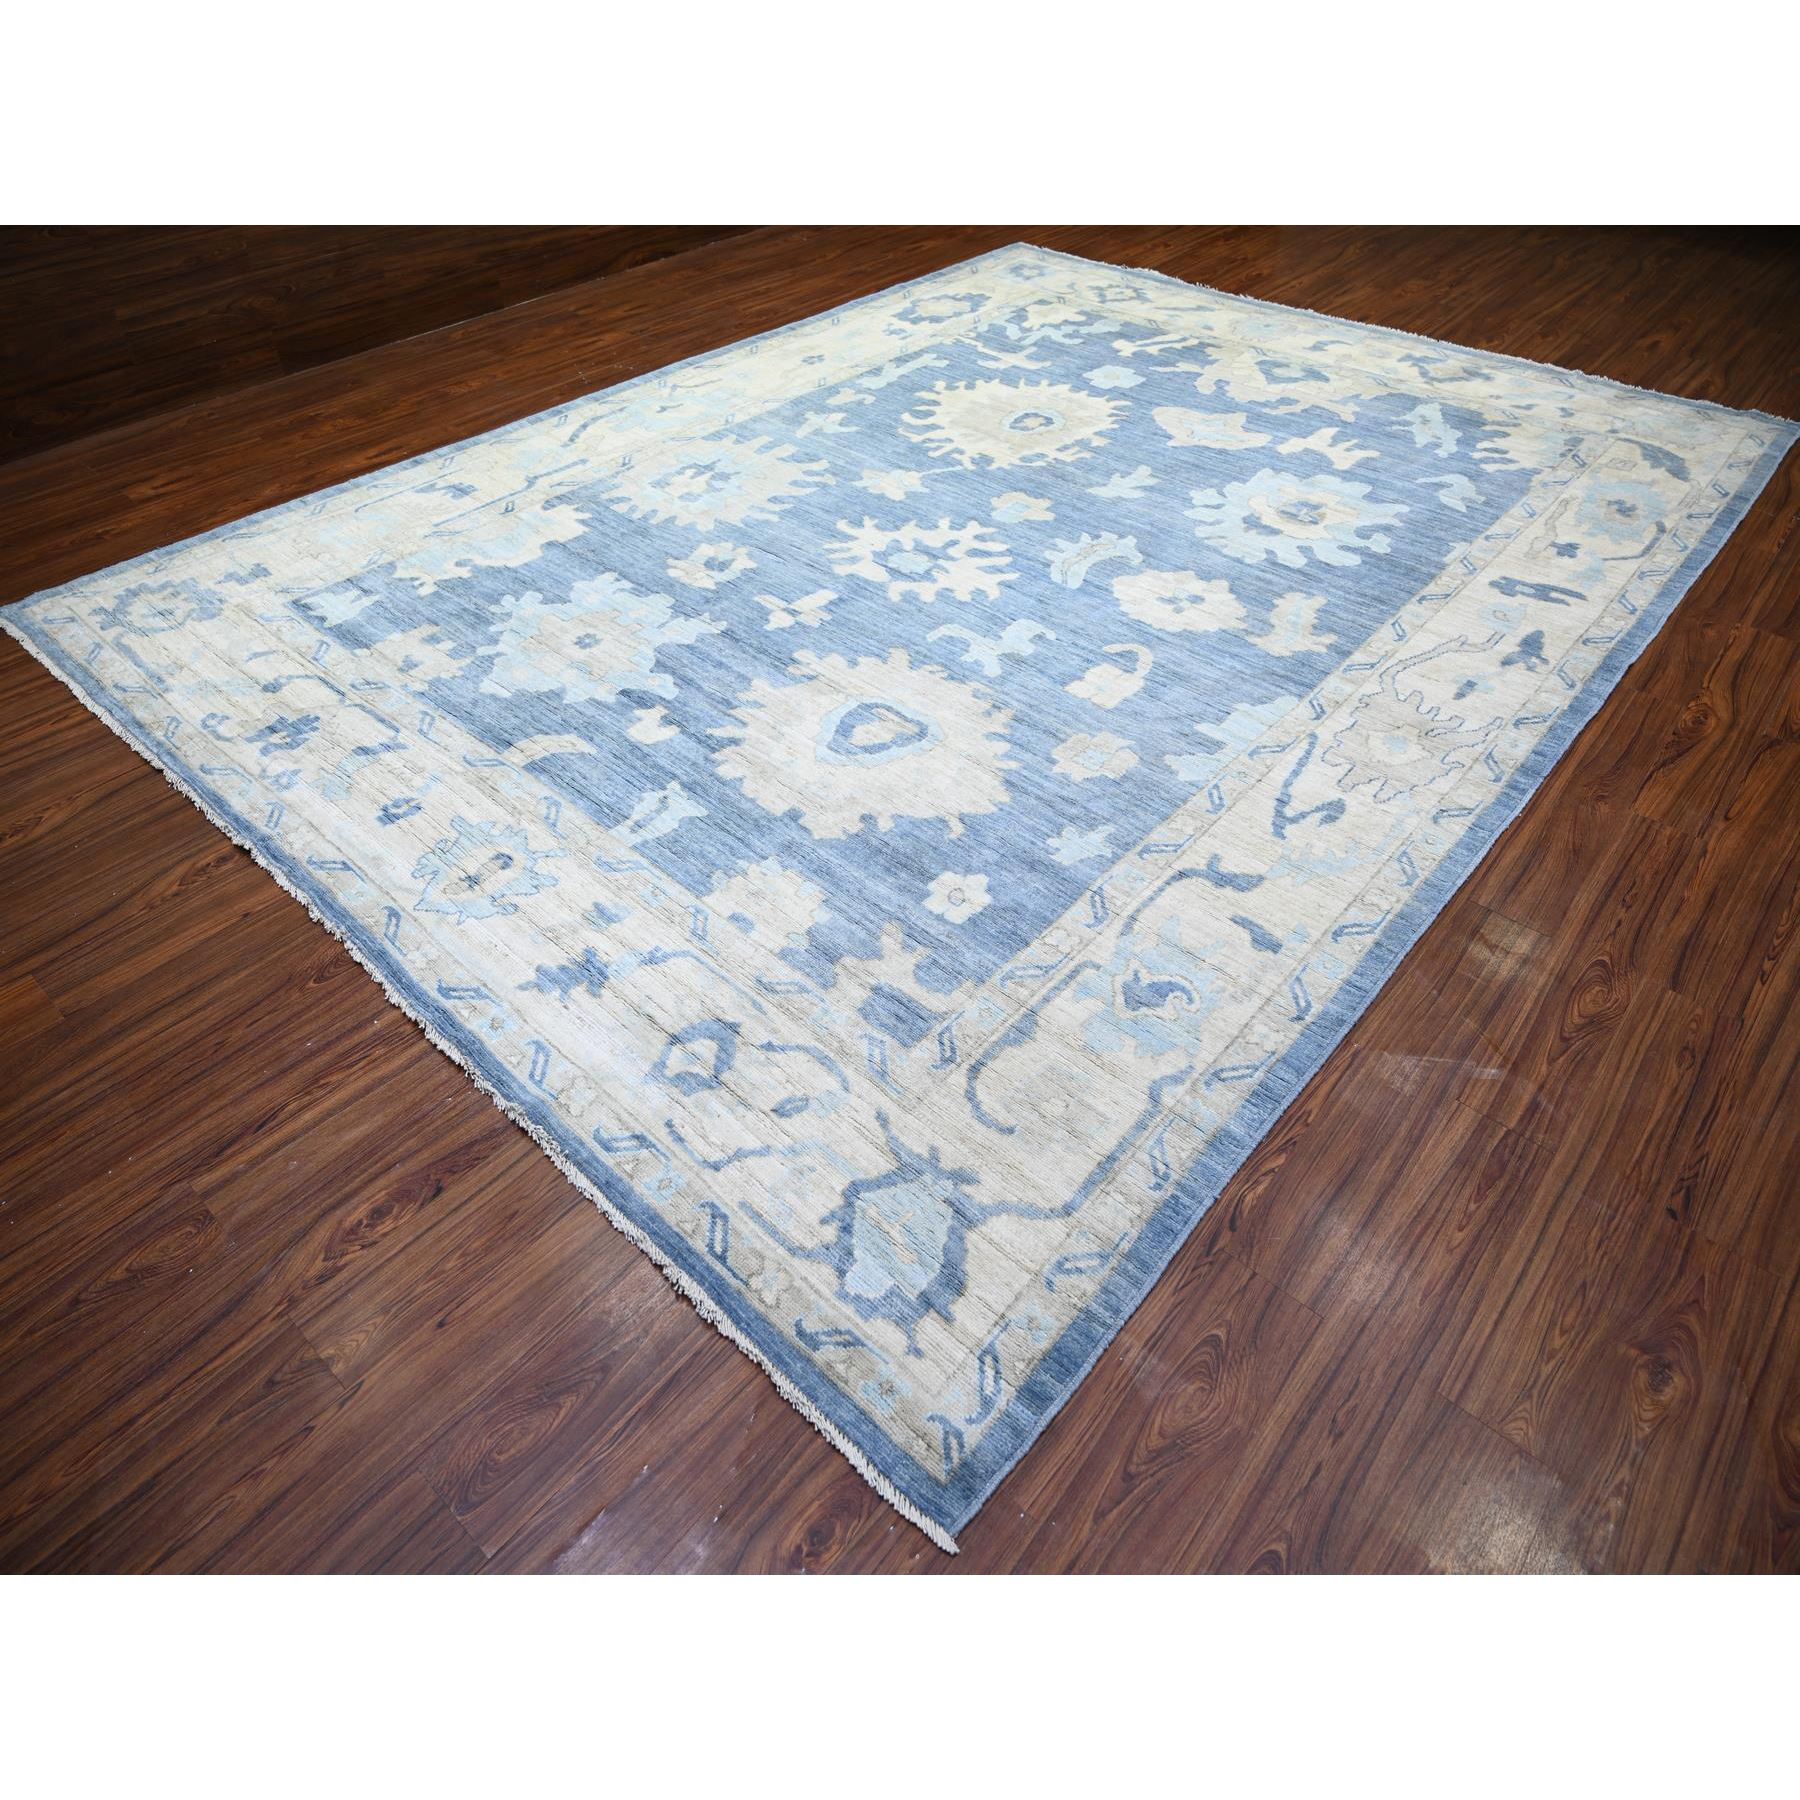 10'4"x13'8" Air Superiority Blue, Hand Woven Afghan Angora Oushak with Large Motifs, Vegetable Dyes 100% Wool, Oriental Rug 